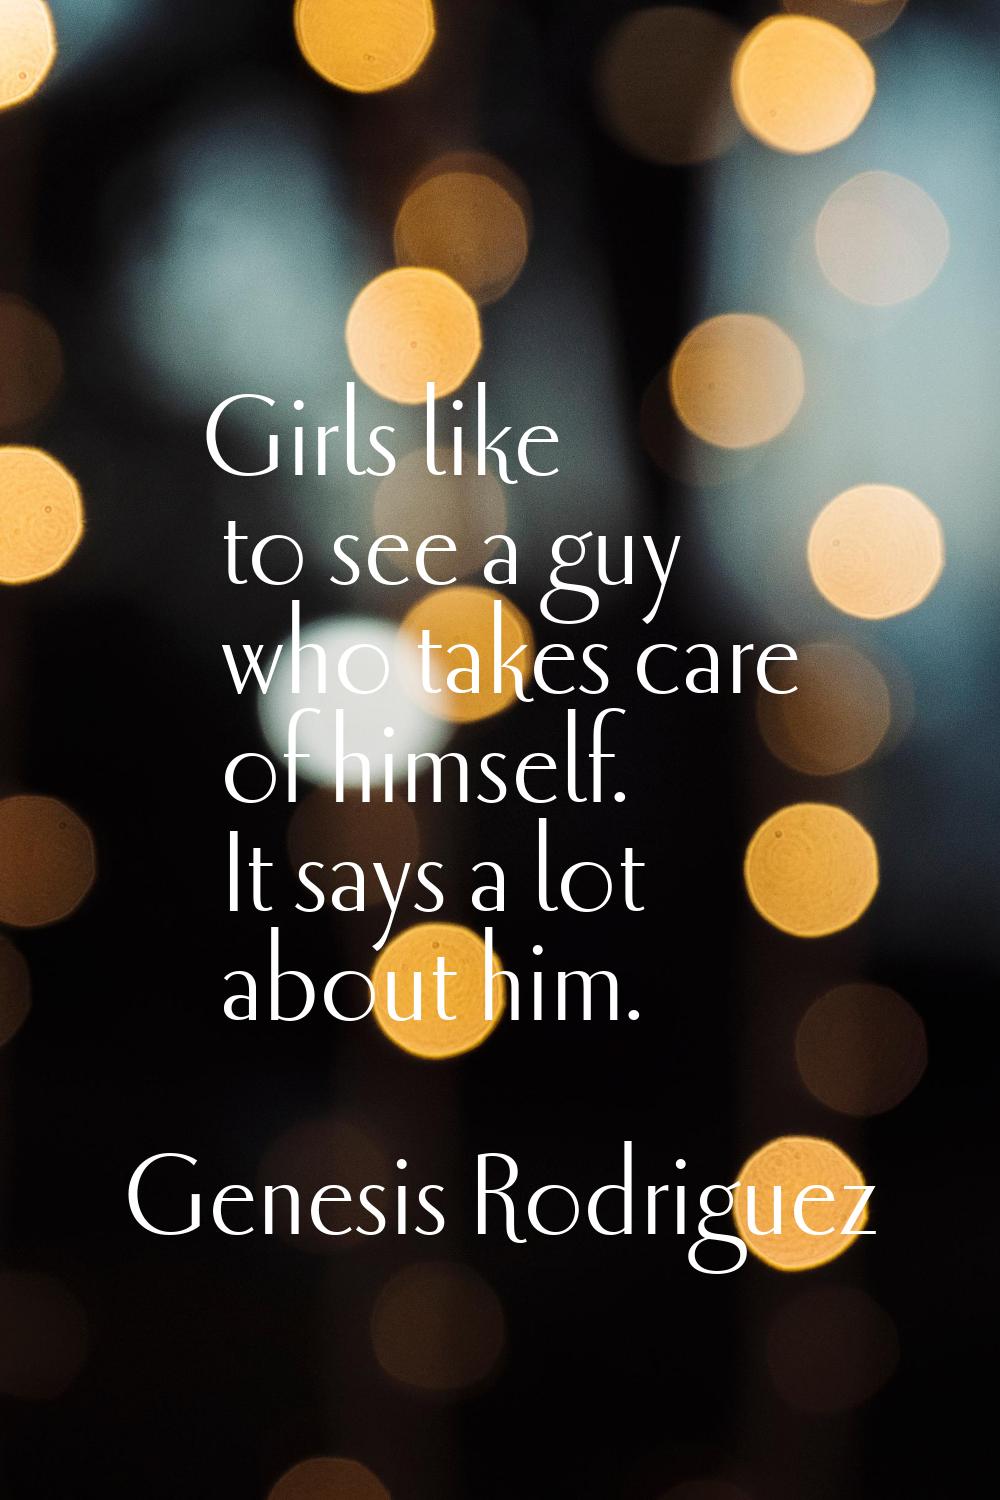 Girls like to see a guy who takes care of himself. It says a lot about him.